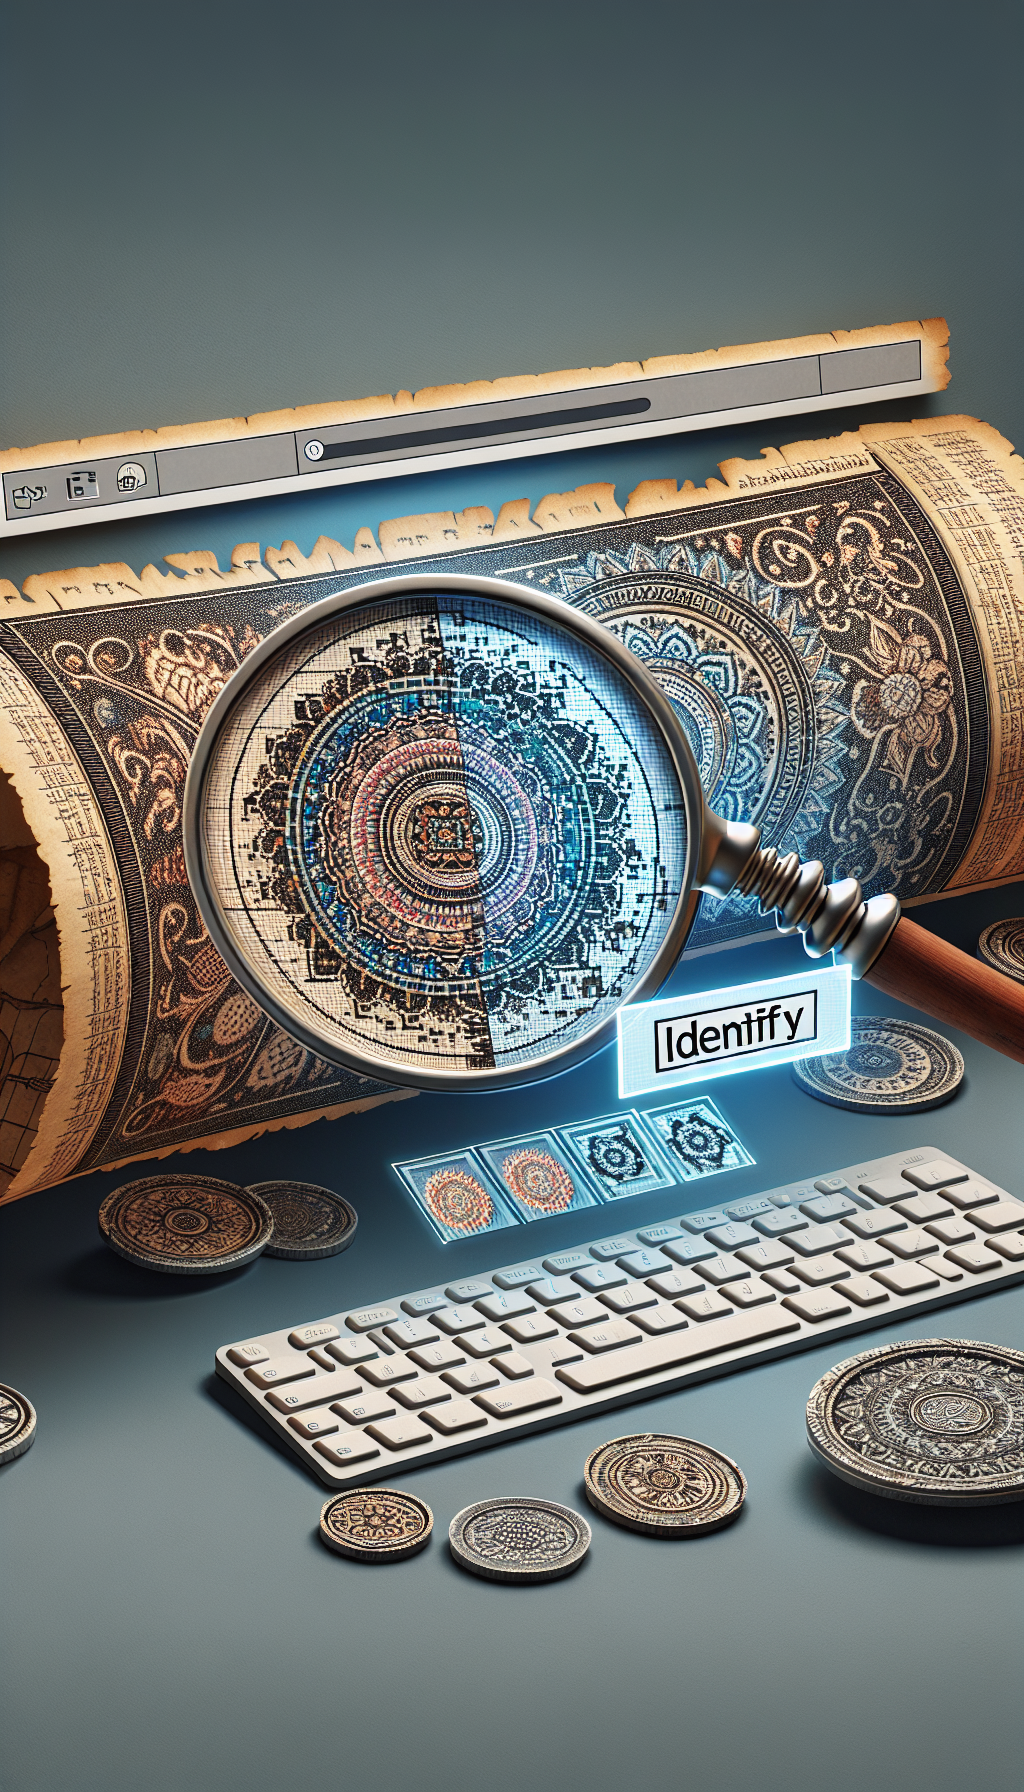 A digital collage fusing pixels and traditional Indian motifs sprawls across an ancient scroll unfurled on a screen, with a magnifying glass highlighting intricate patterns atop a keyboard button labeled "Identify." A sidebar displays "Value Guide" with virtual tokens featuring artifact images as they morph from tangible to digital form, symbolizing the seamless blend of antiquity and cyberspace.